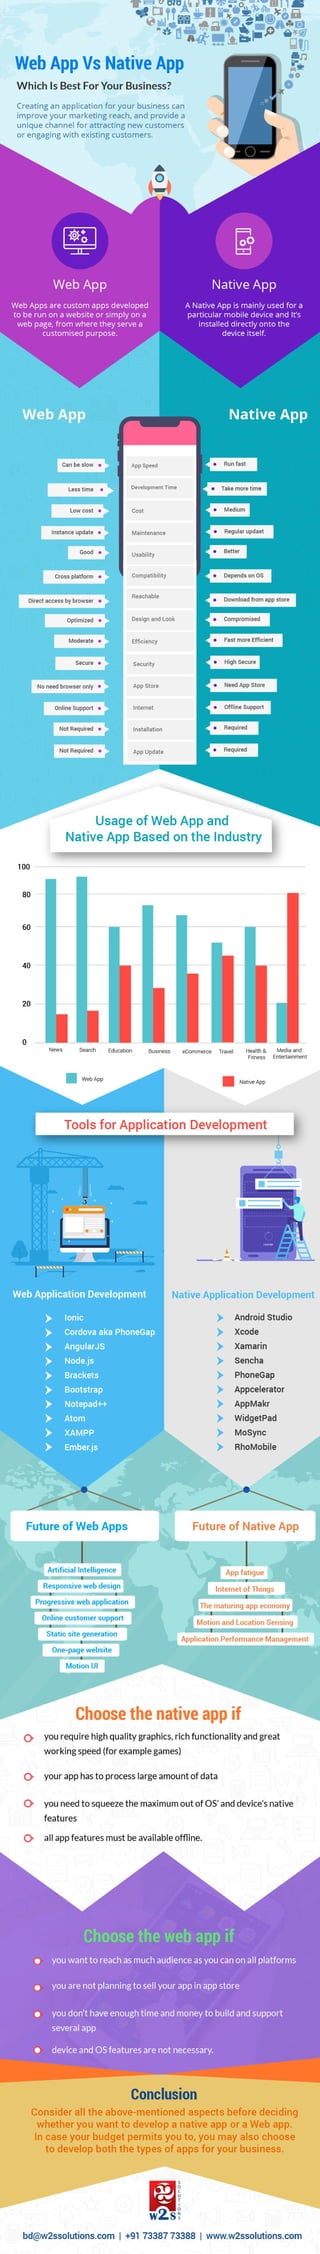 Web App Vs Native App – Which is better for your business?